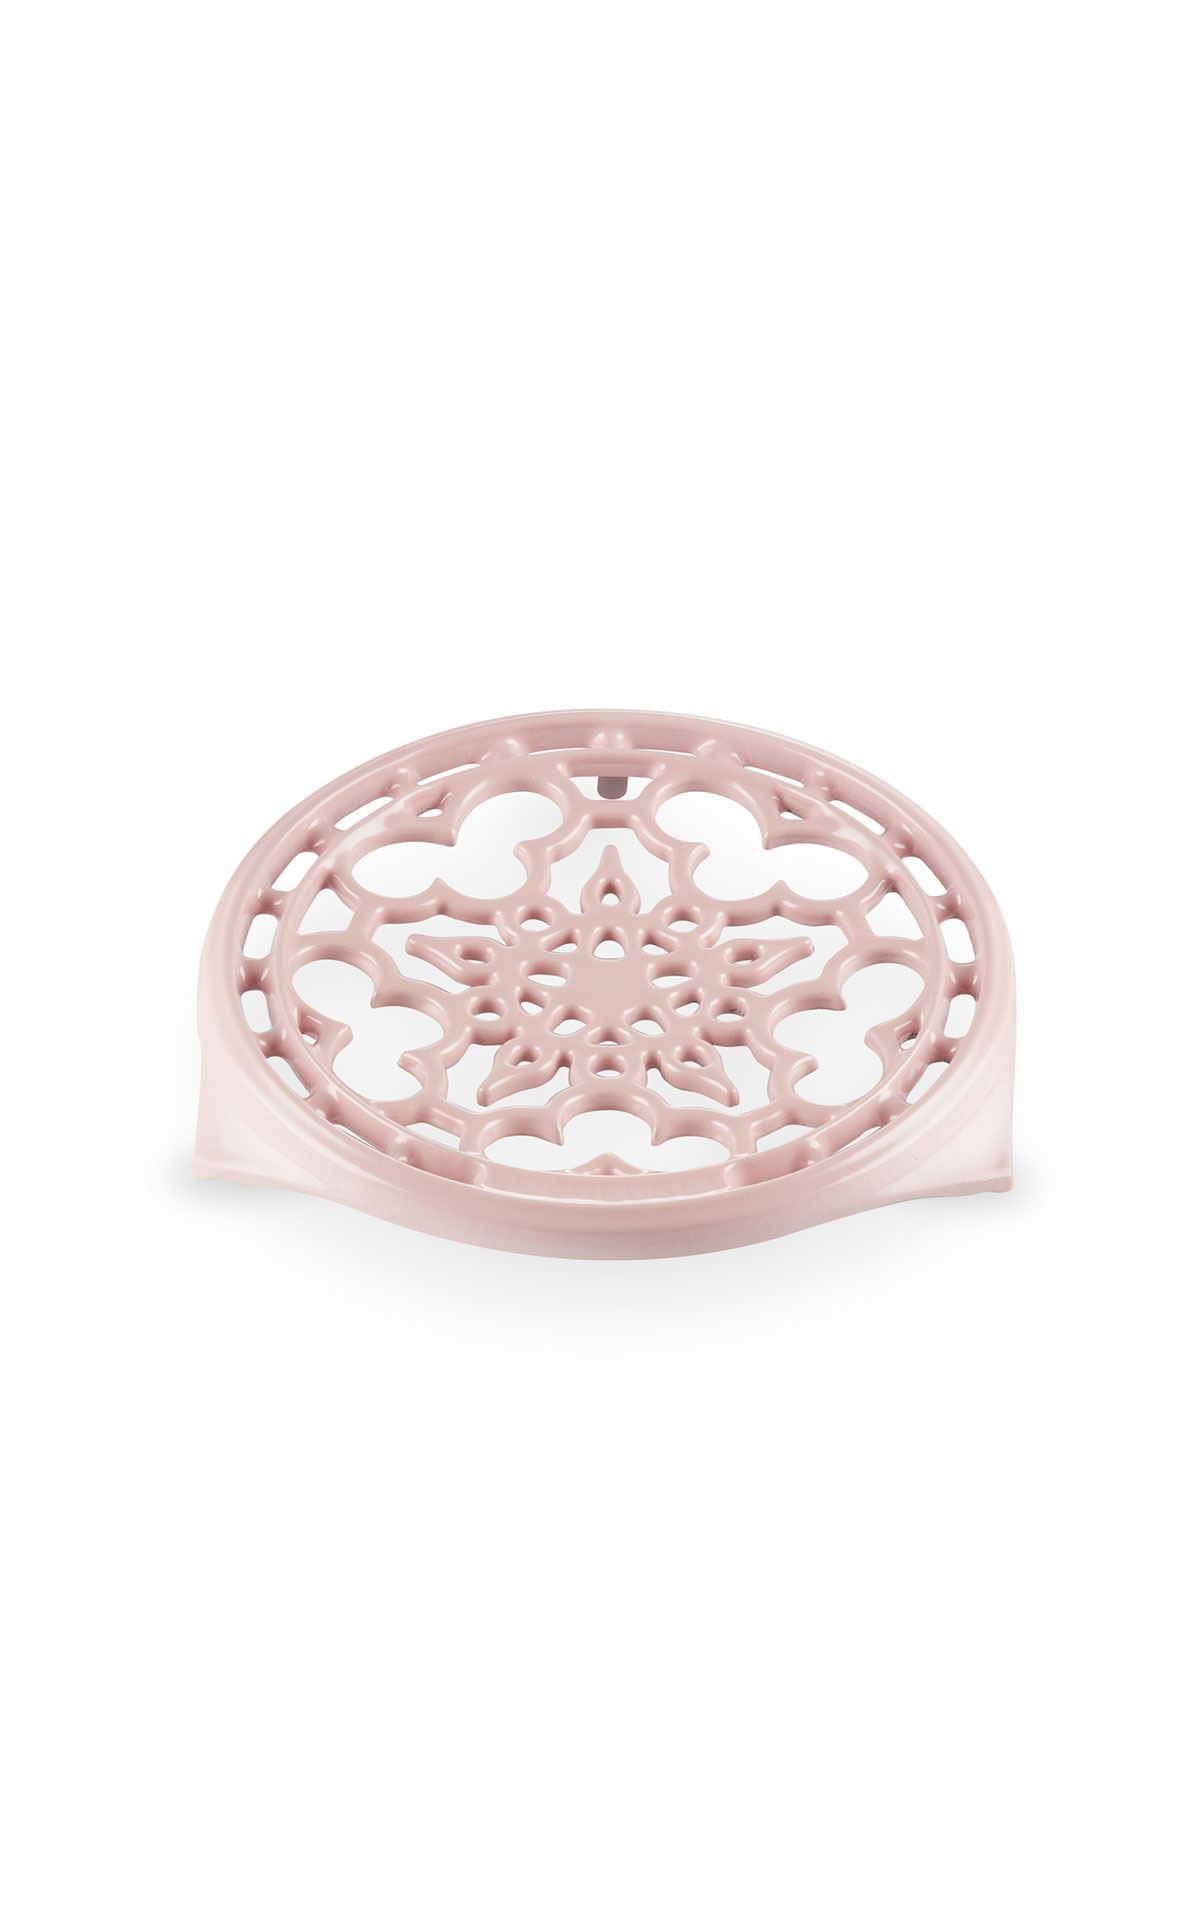 Le Creuset Cast iron round trivit chiffon pink from Bicester Village